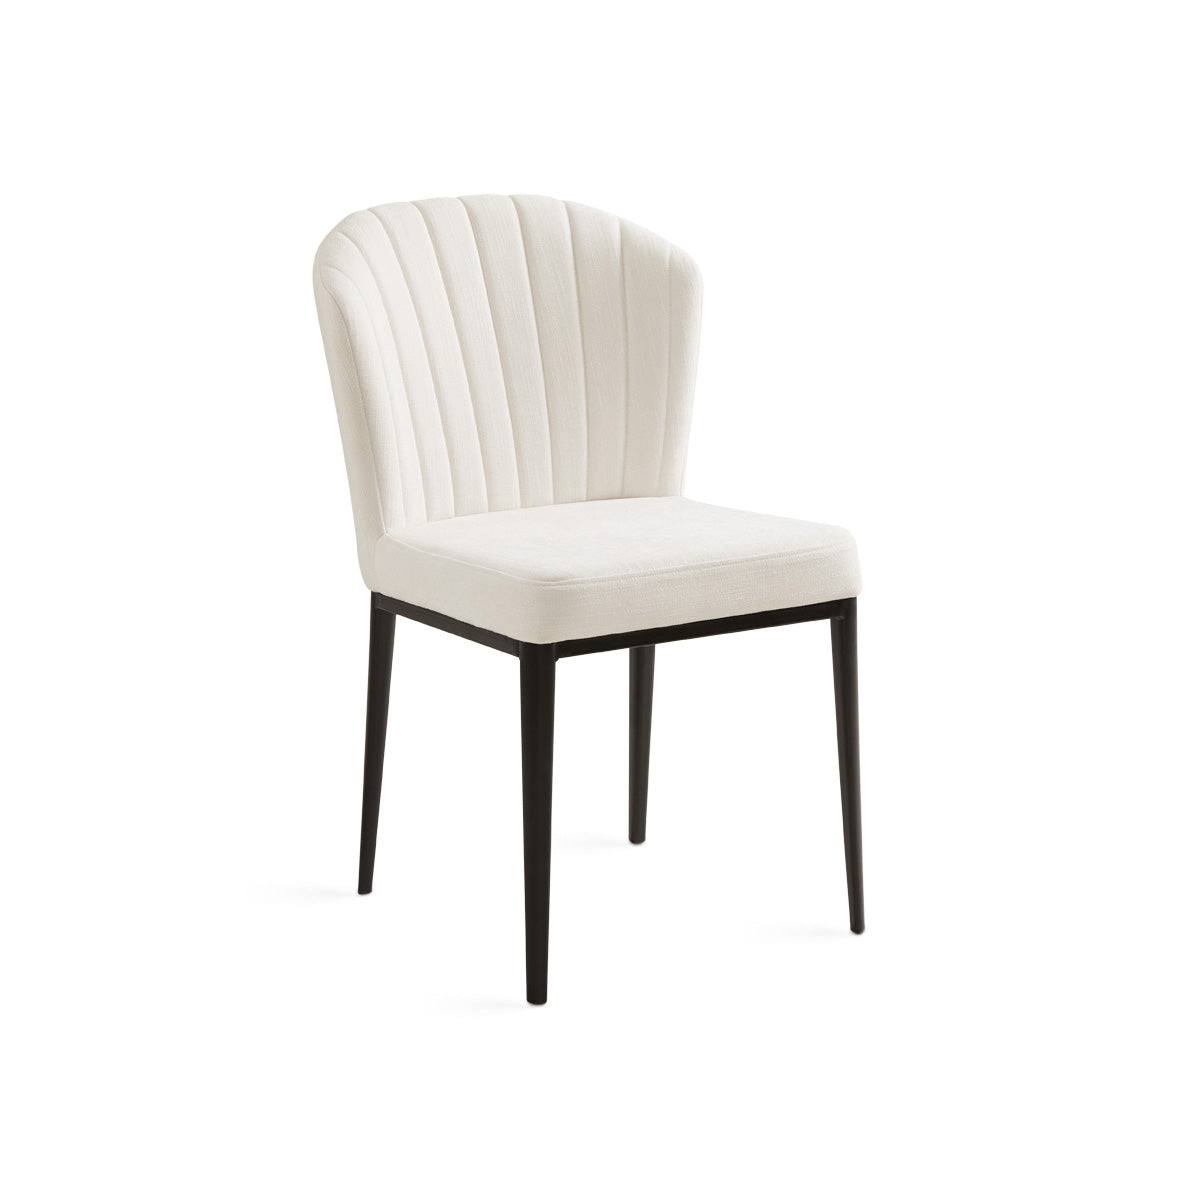 Shell Shape Dining Chair Silex Ivory